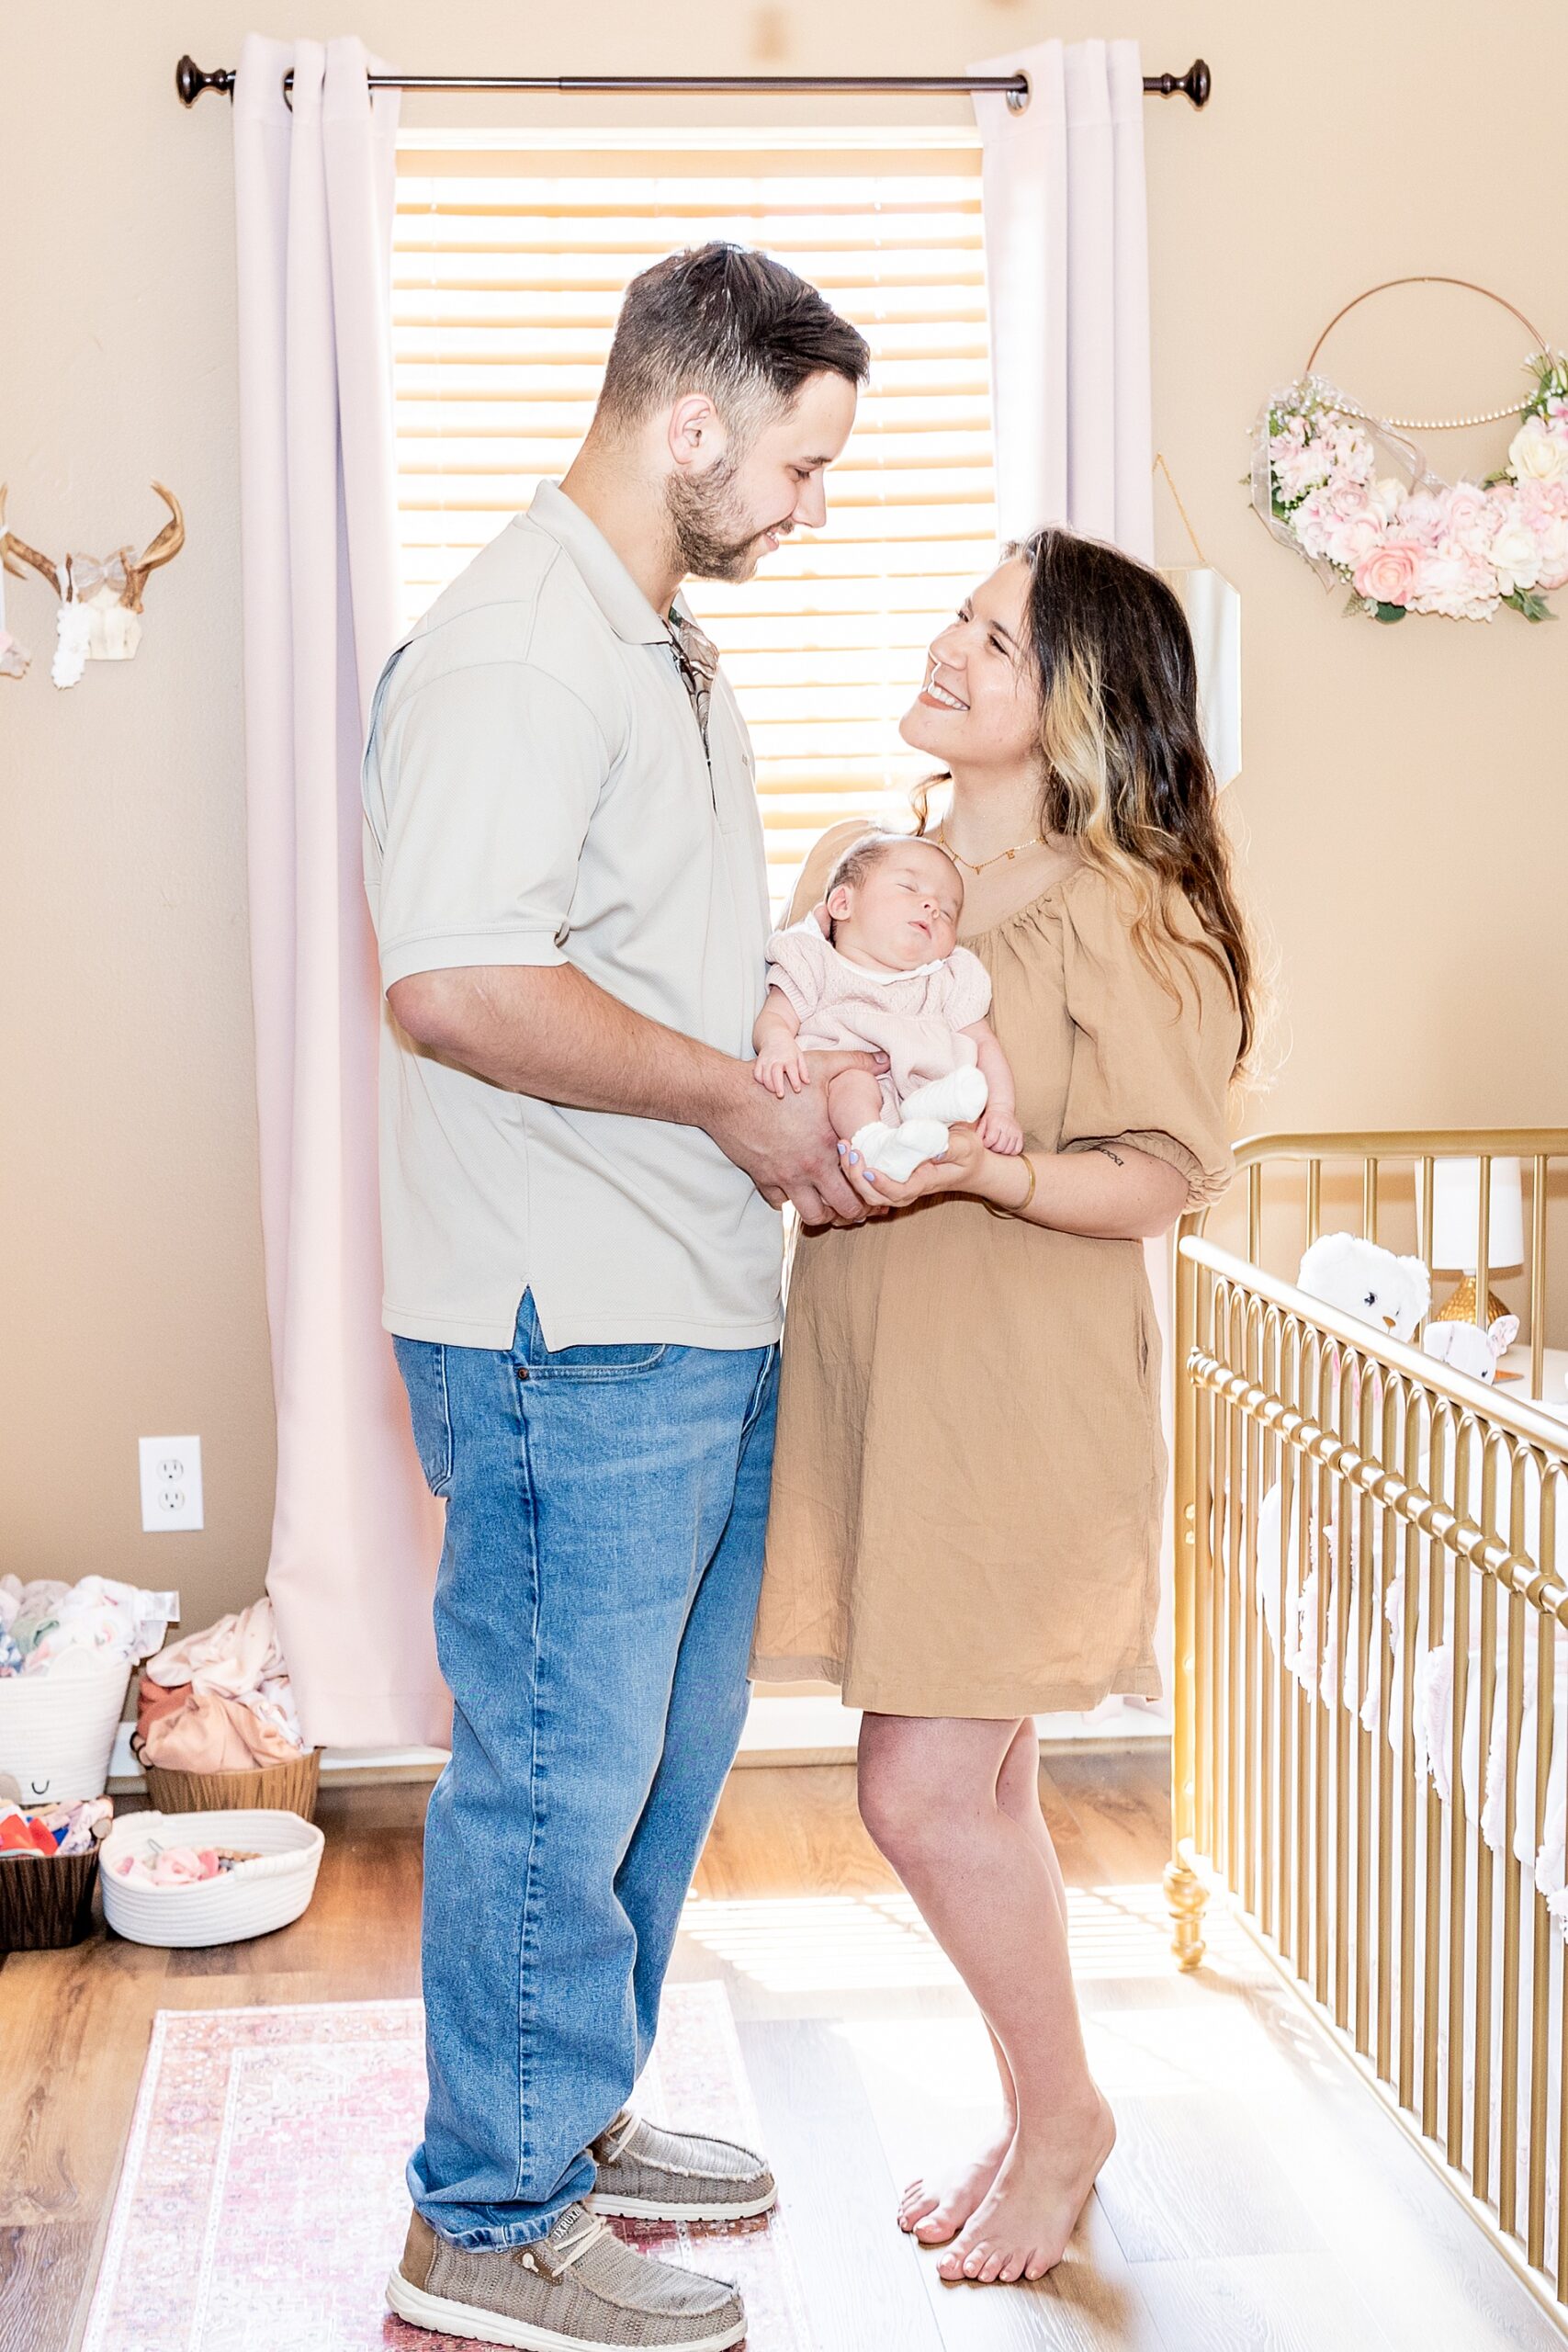 Greenville In-Home Newborn Session by Sarah Claire 